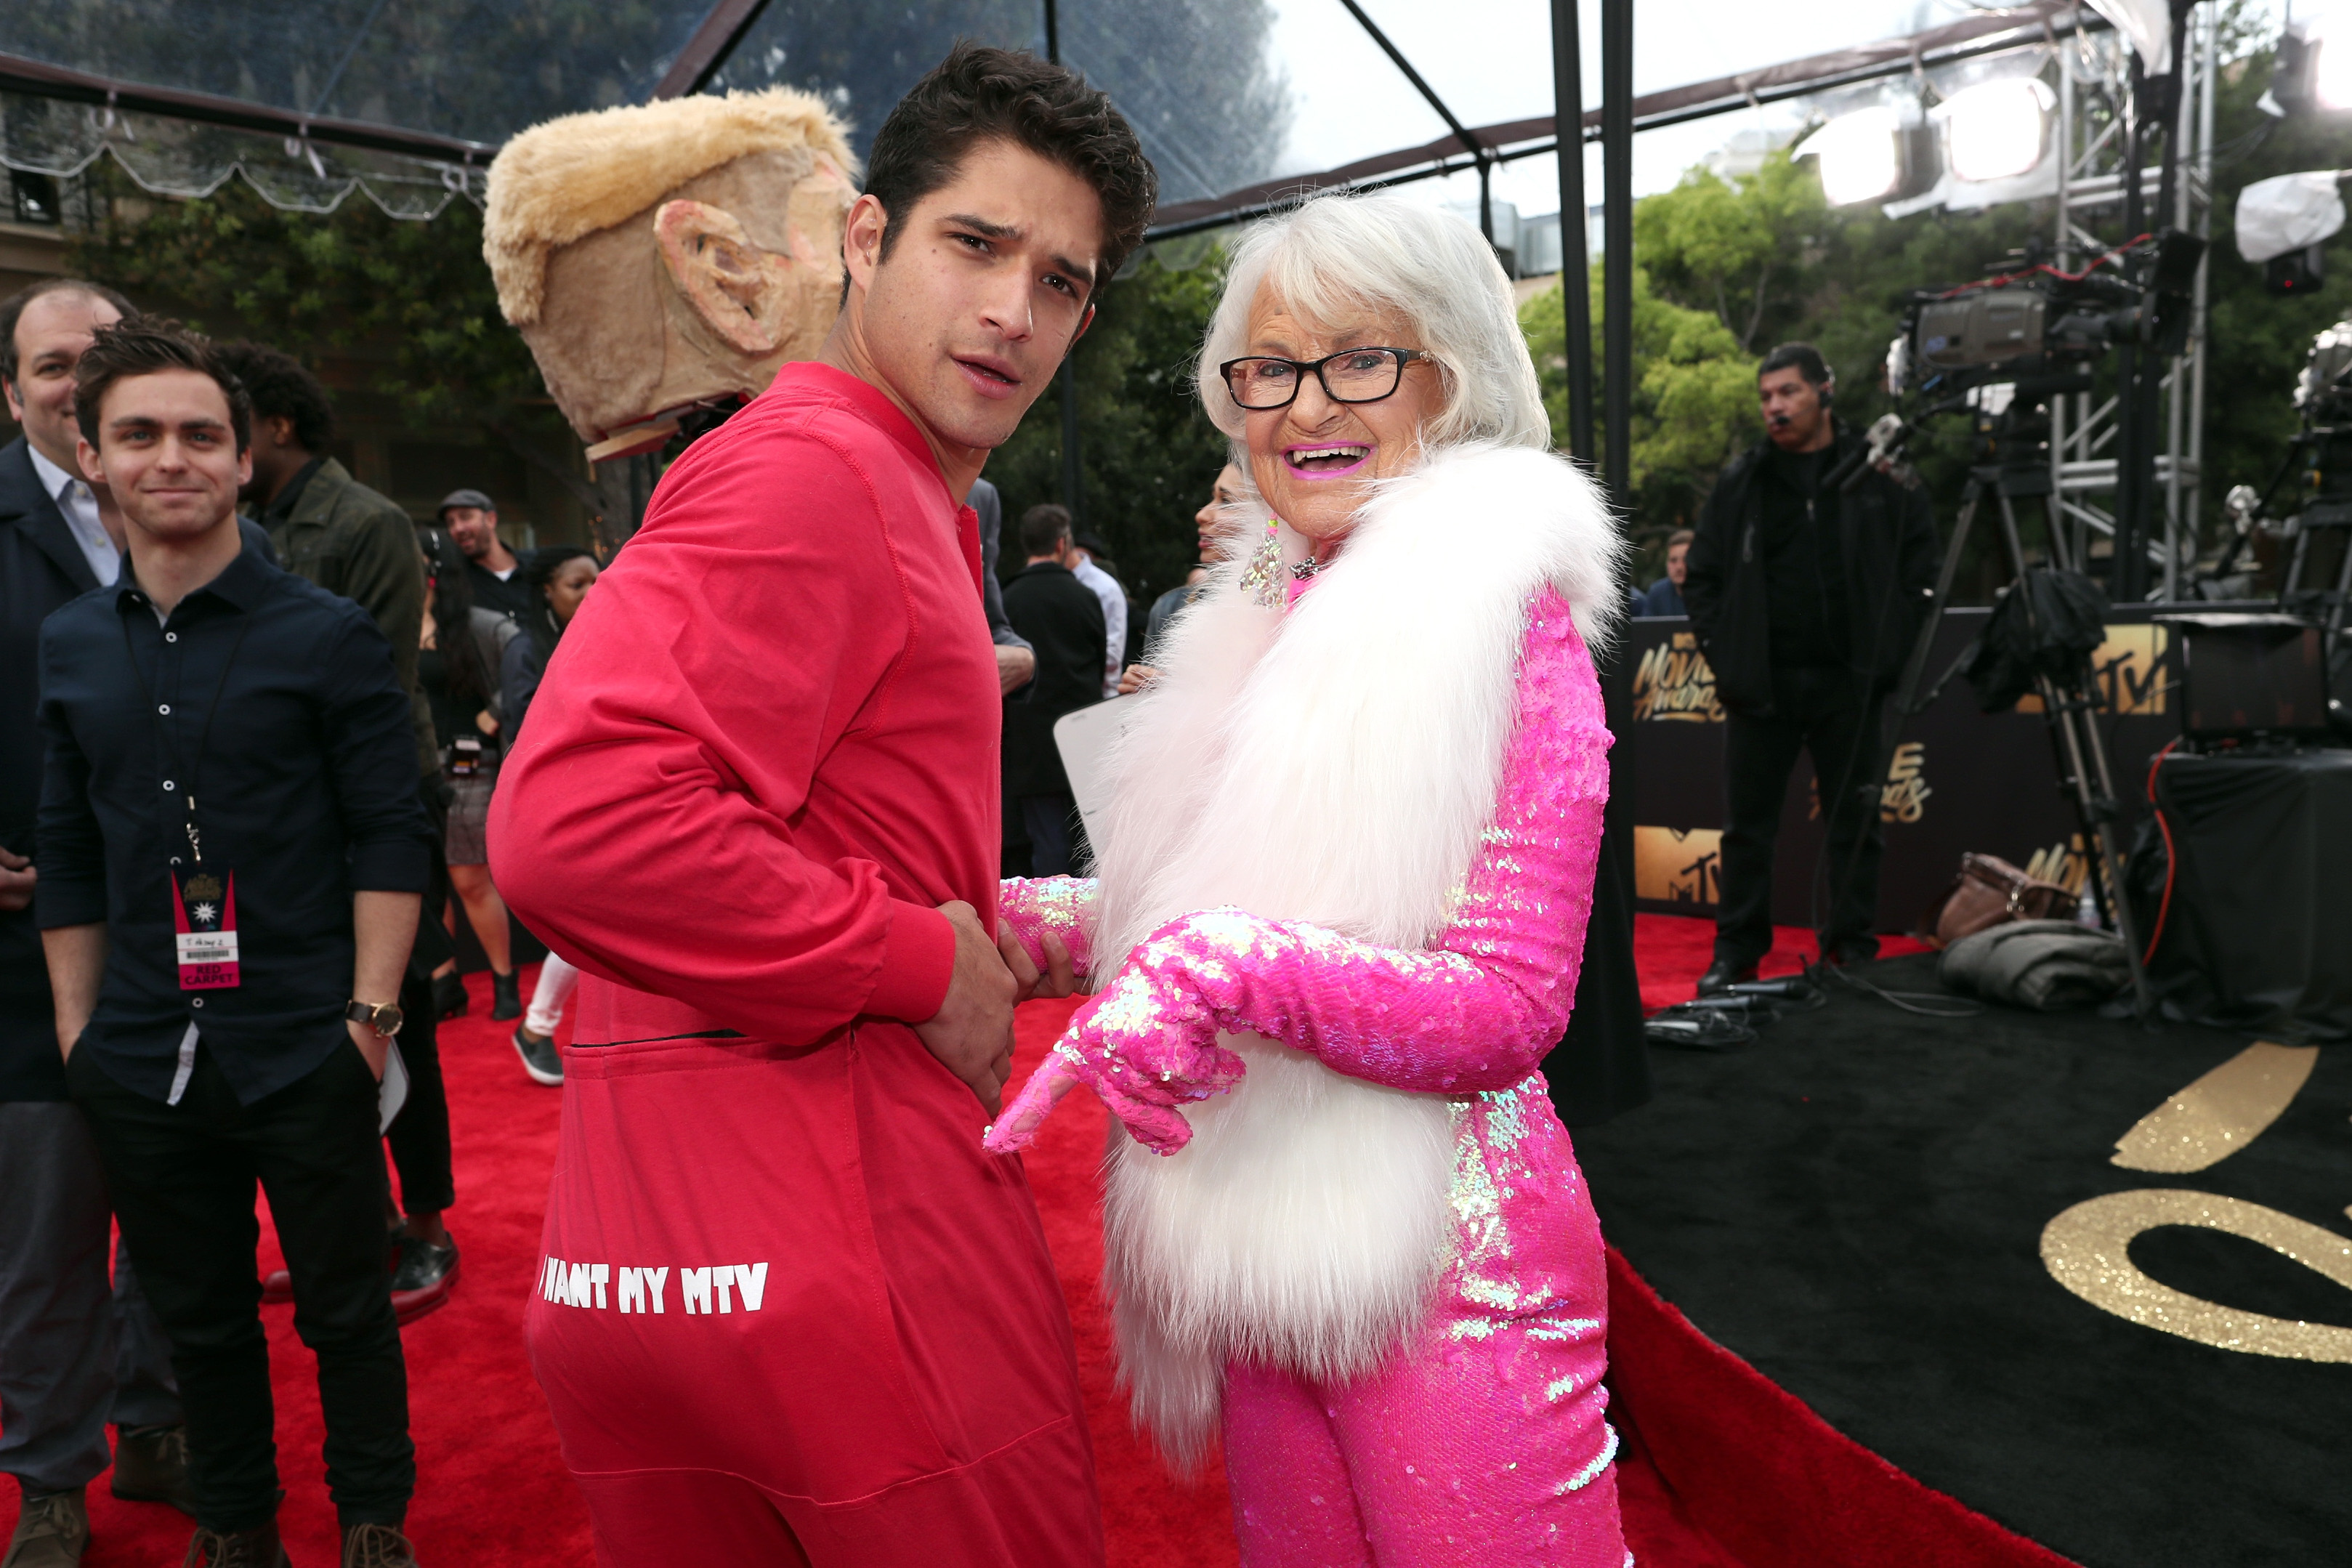 Tyler Posey (left) and Baddie Winkle on the red carpet at the 2016 MTV Movie Awards.